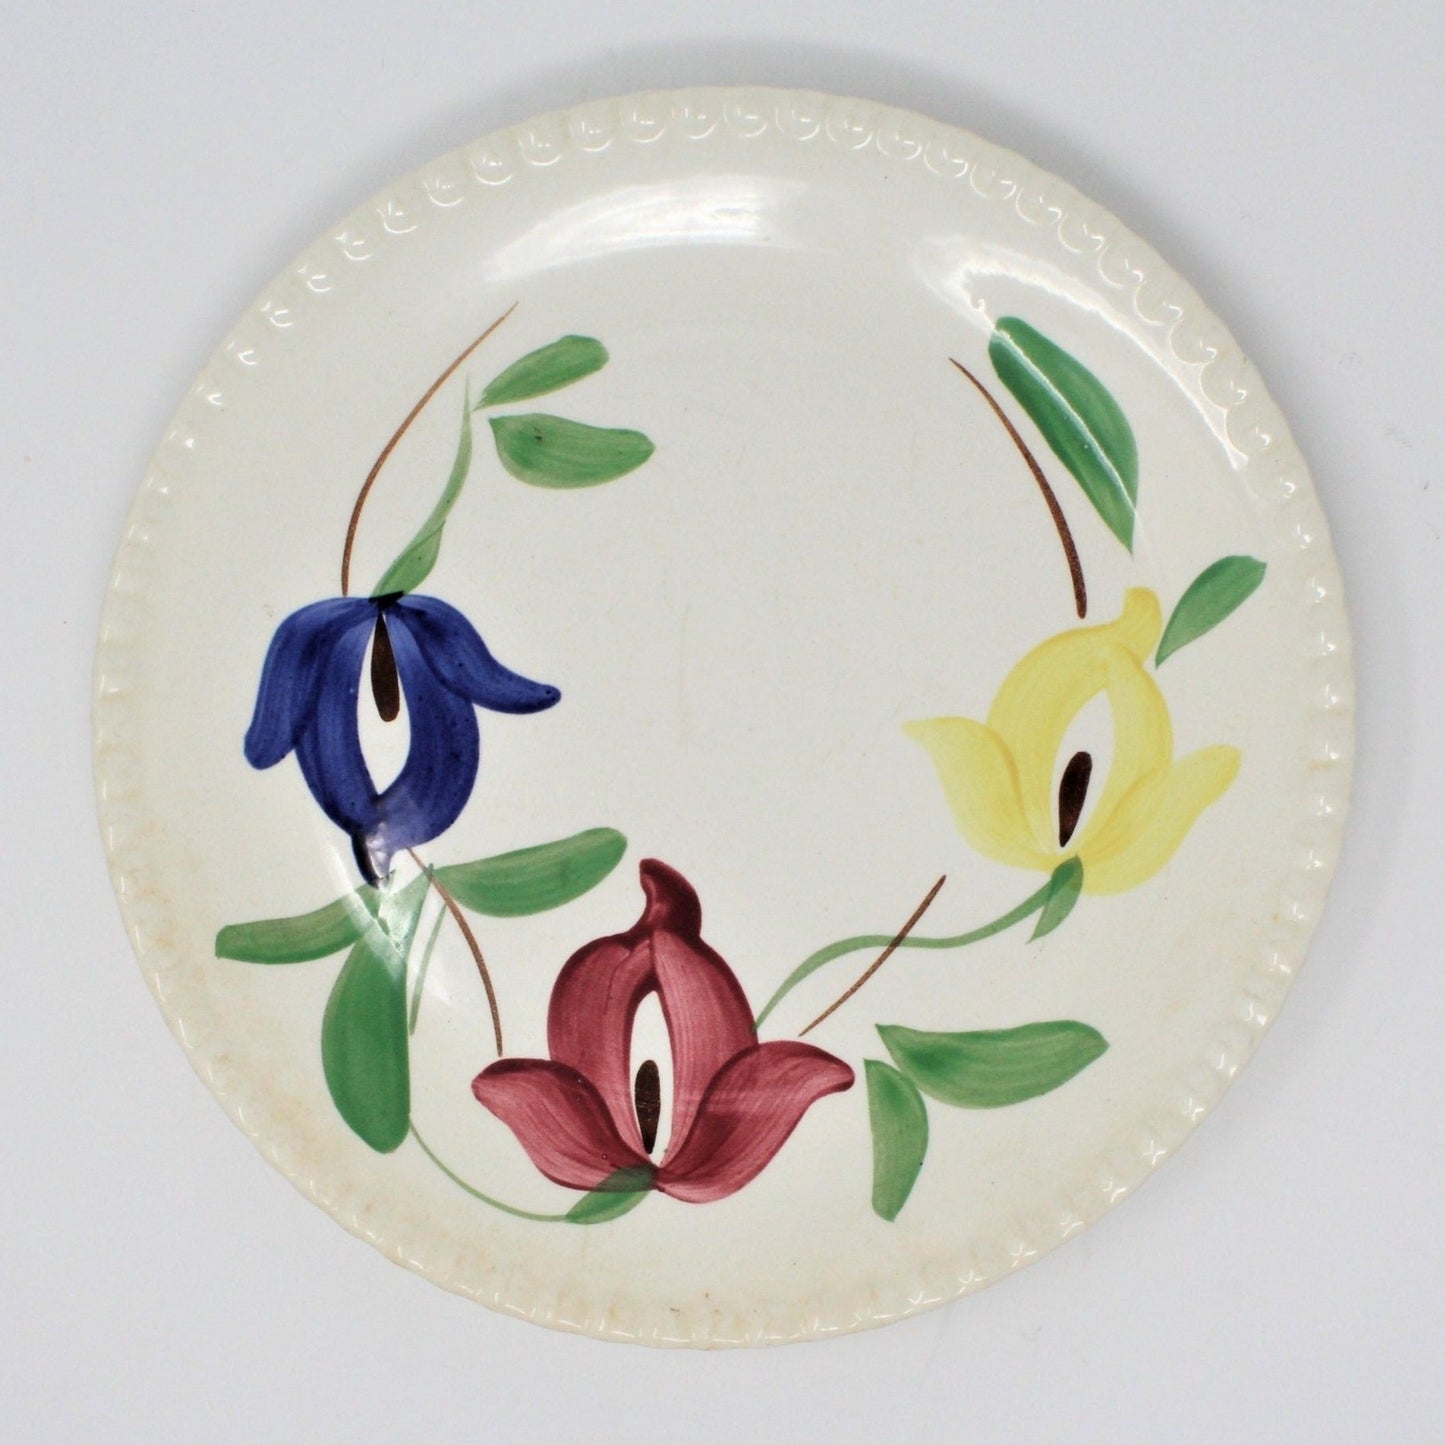 Luncheon Plate, Blue Ridge Southern Pottery, Carnival, Ceramic Vintage